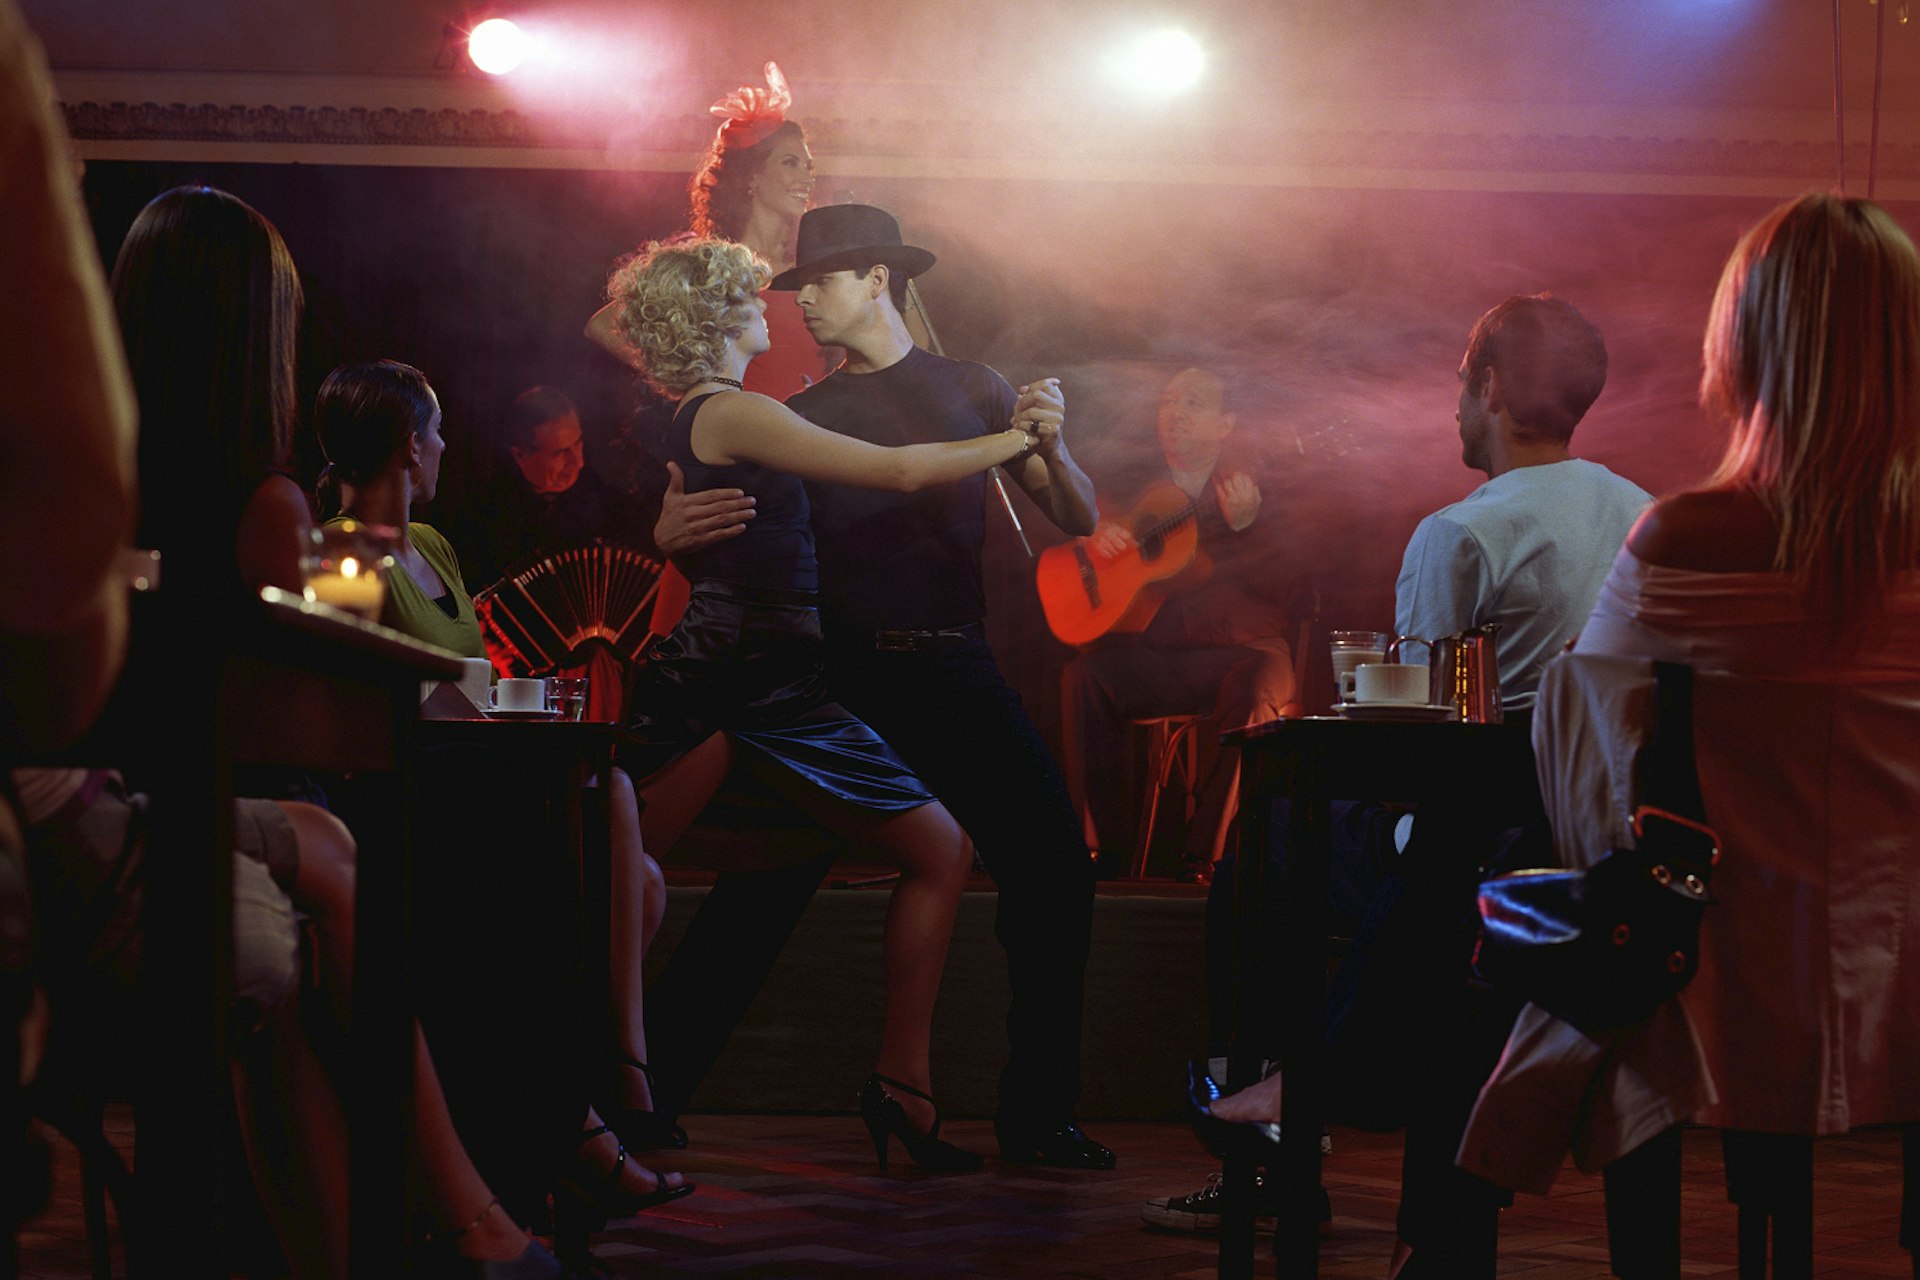 Young couple dancing tango for audience in restaurant